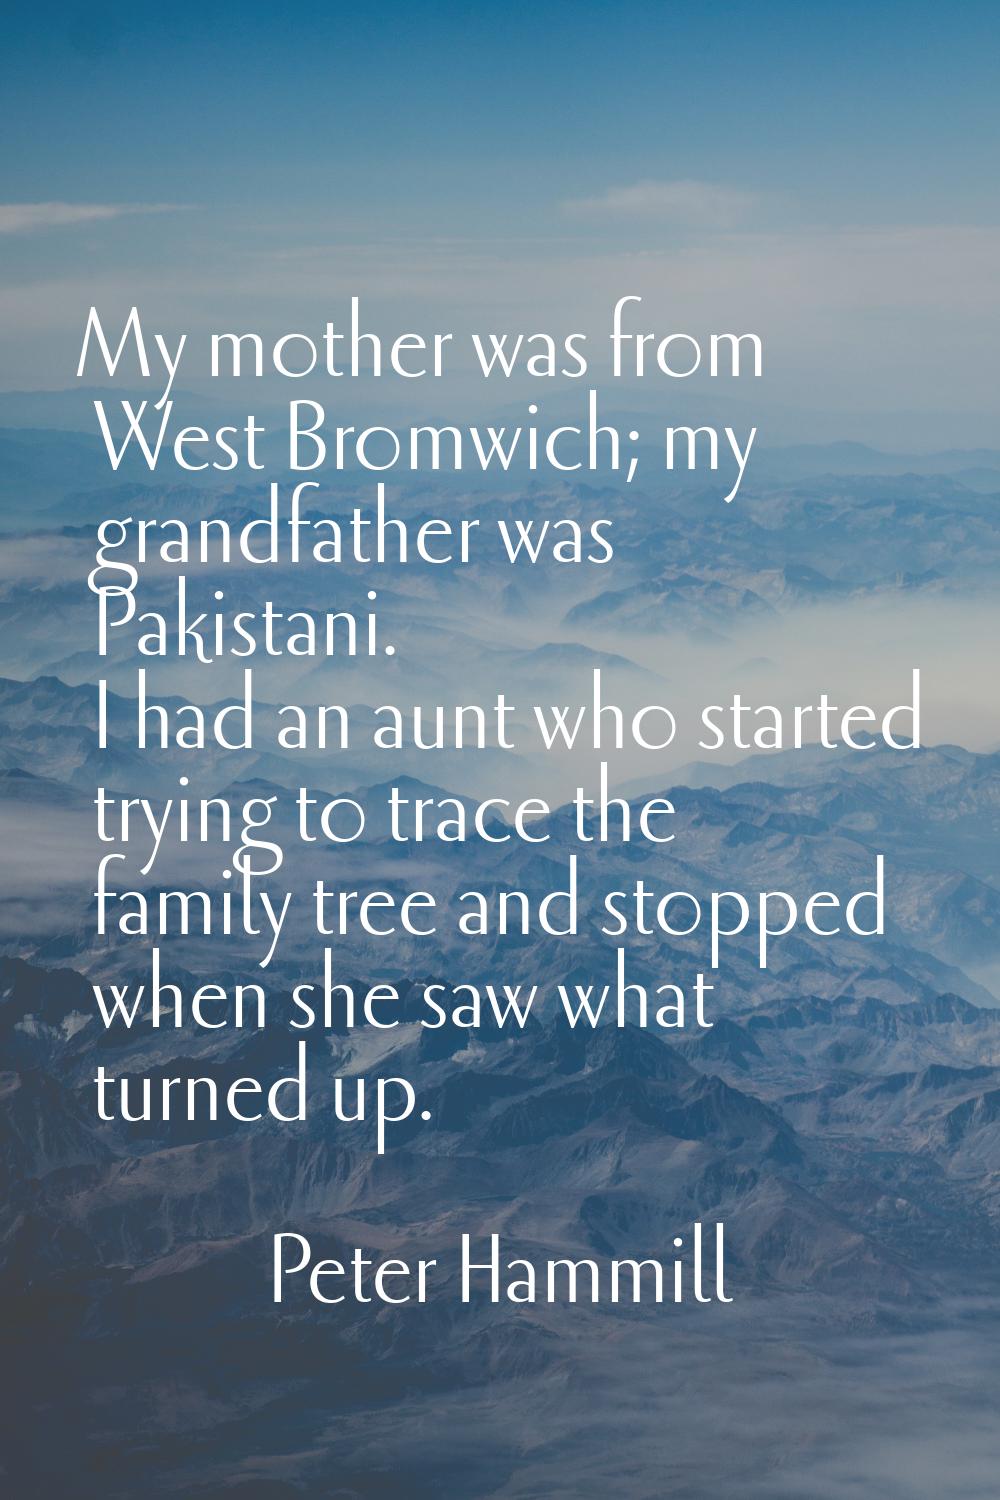 My mother was from West Bromwich; my grandfather was Pakistani. I had an aunt who started trying to